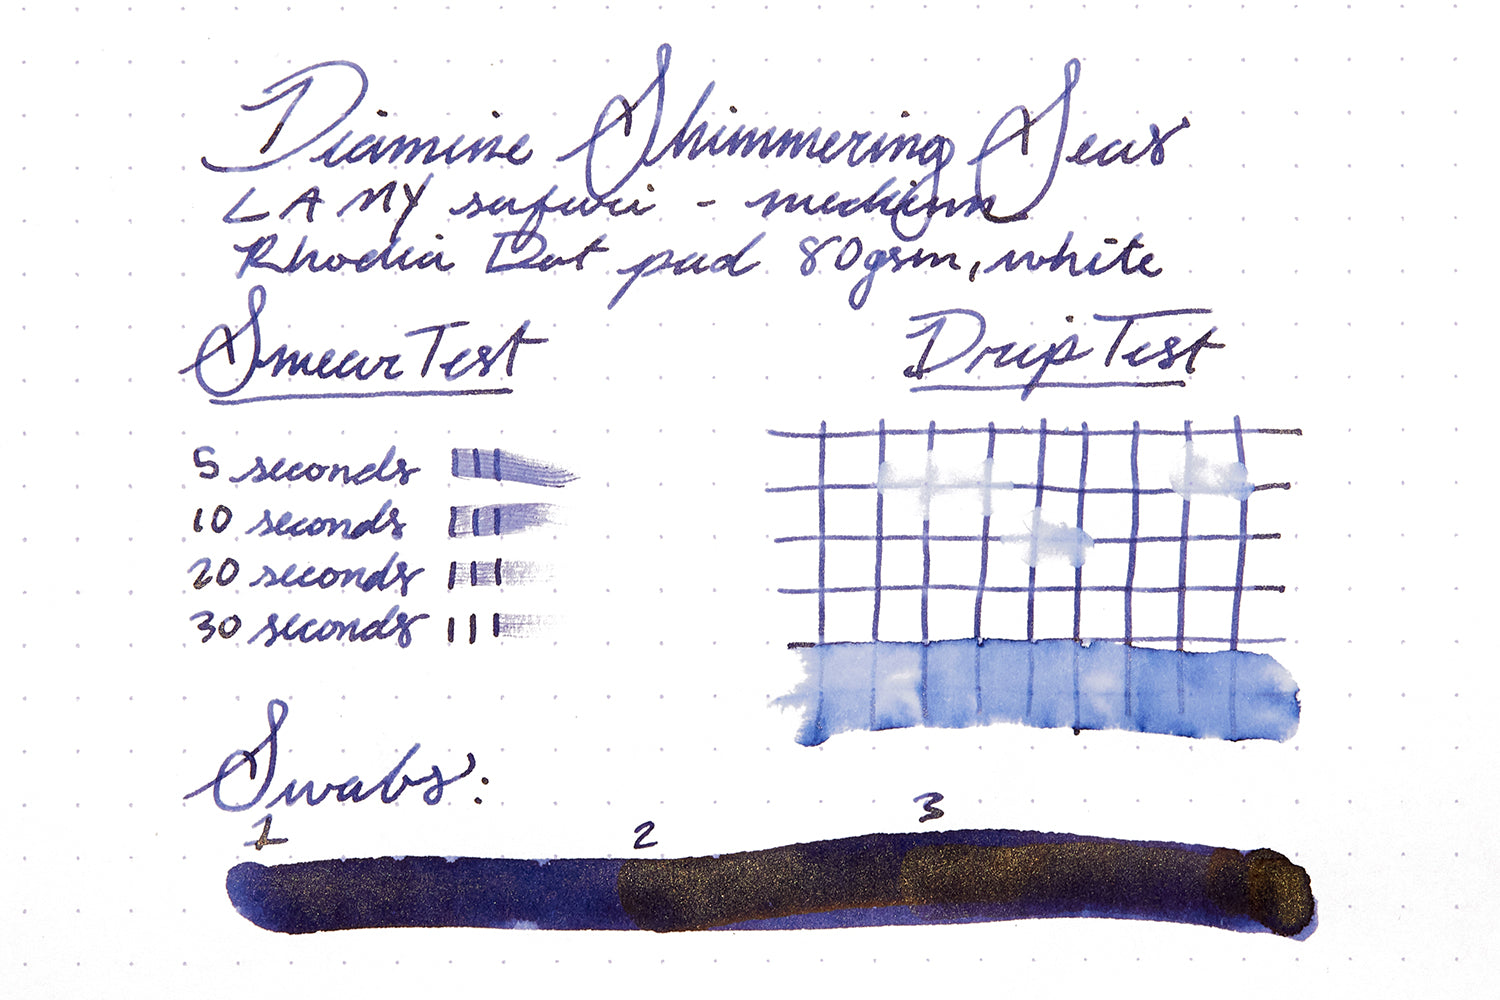 Diamine shimmering seas ink review